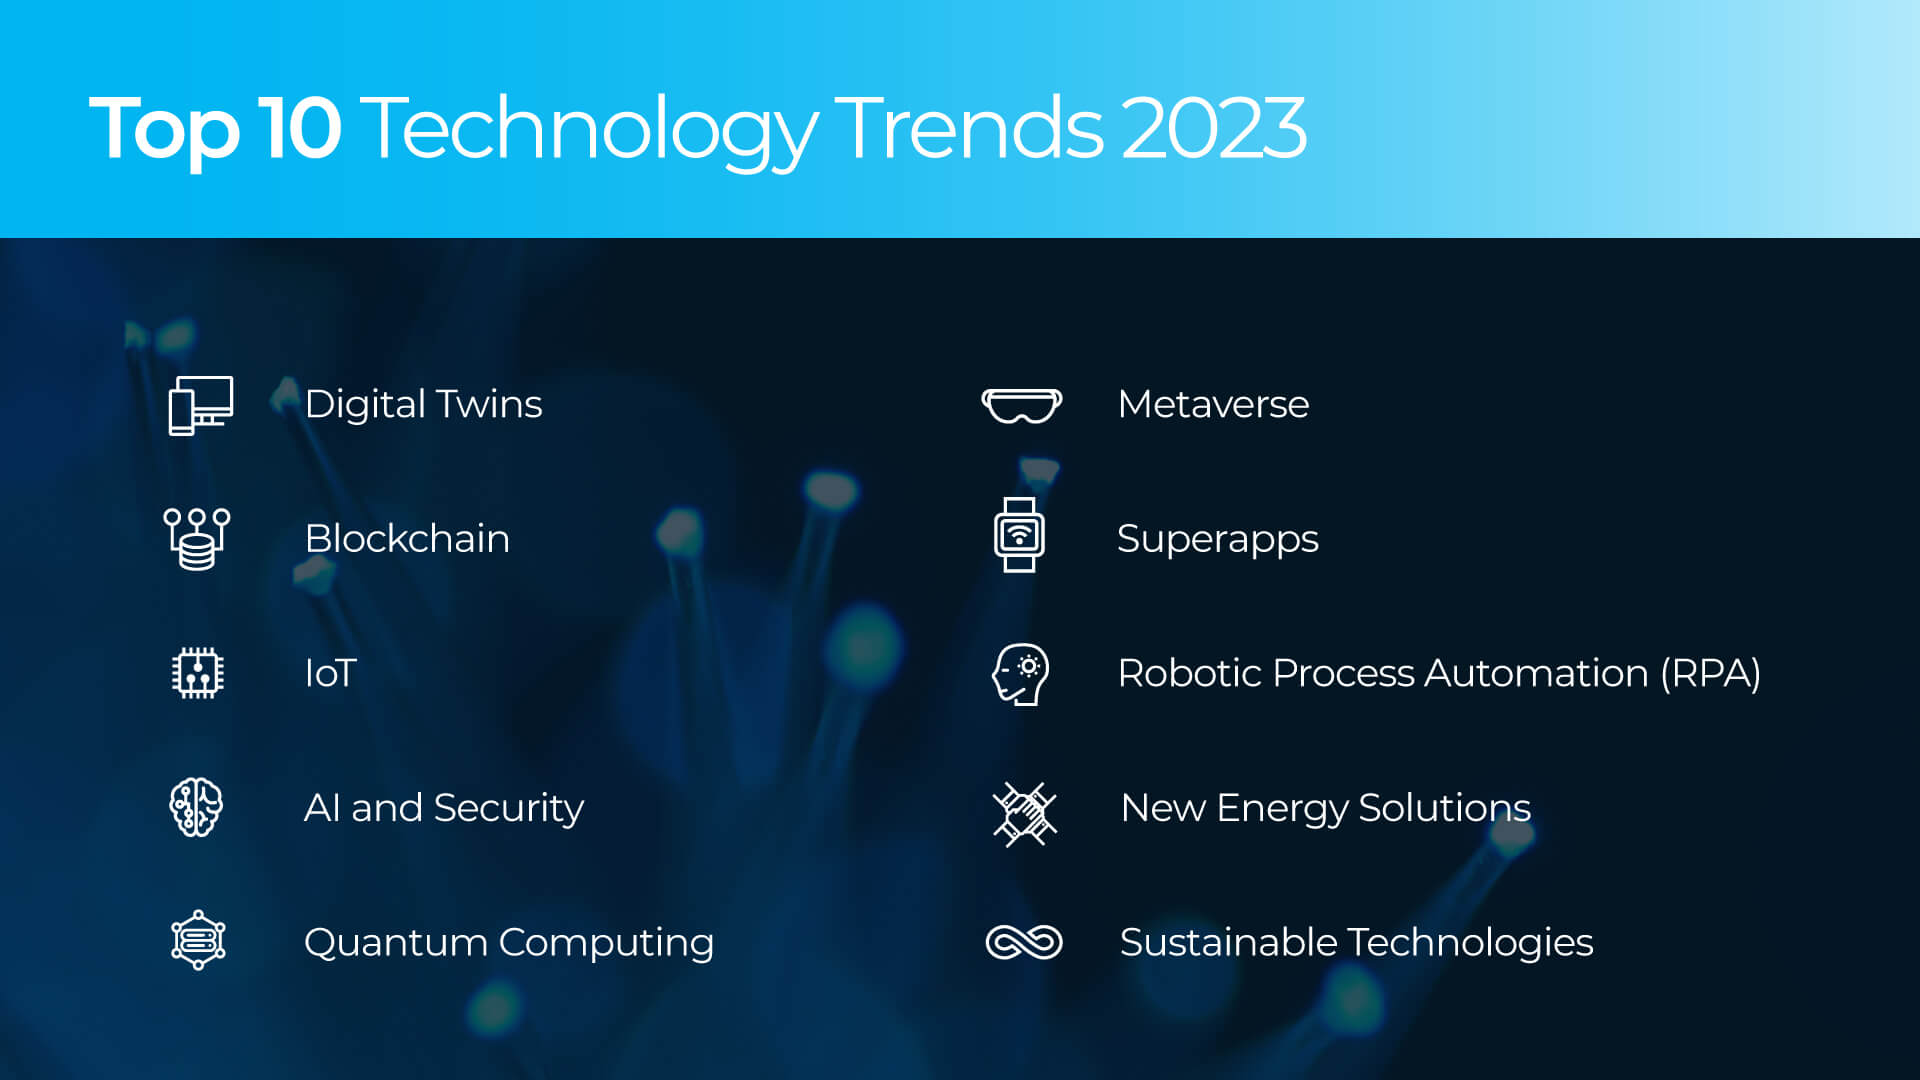 What are the technology trends we need to know about?